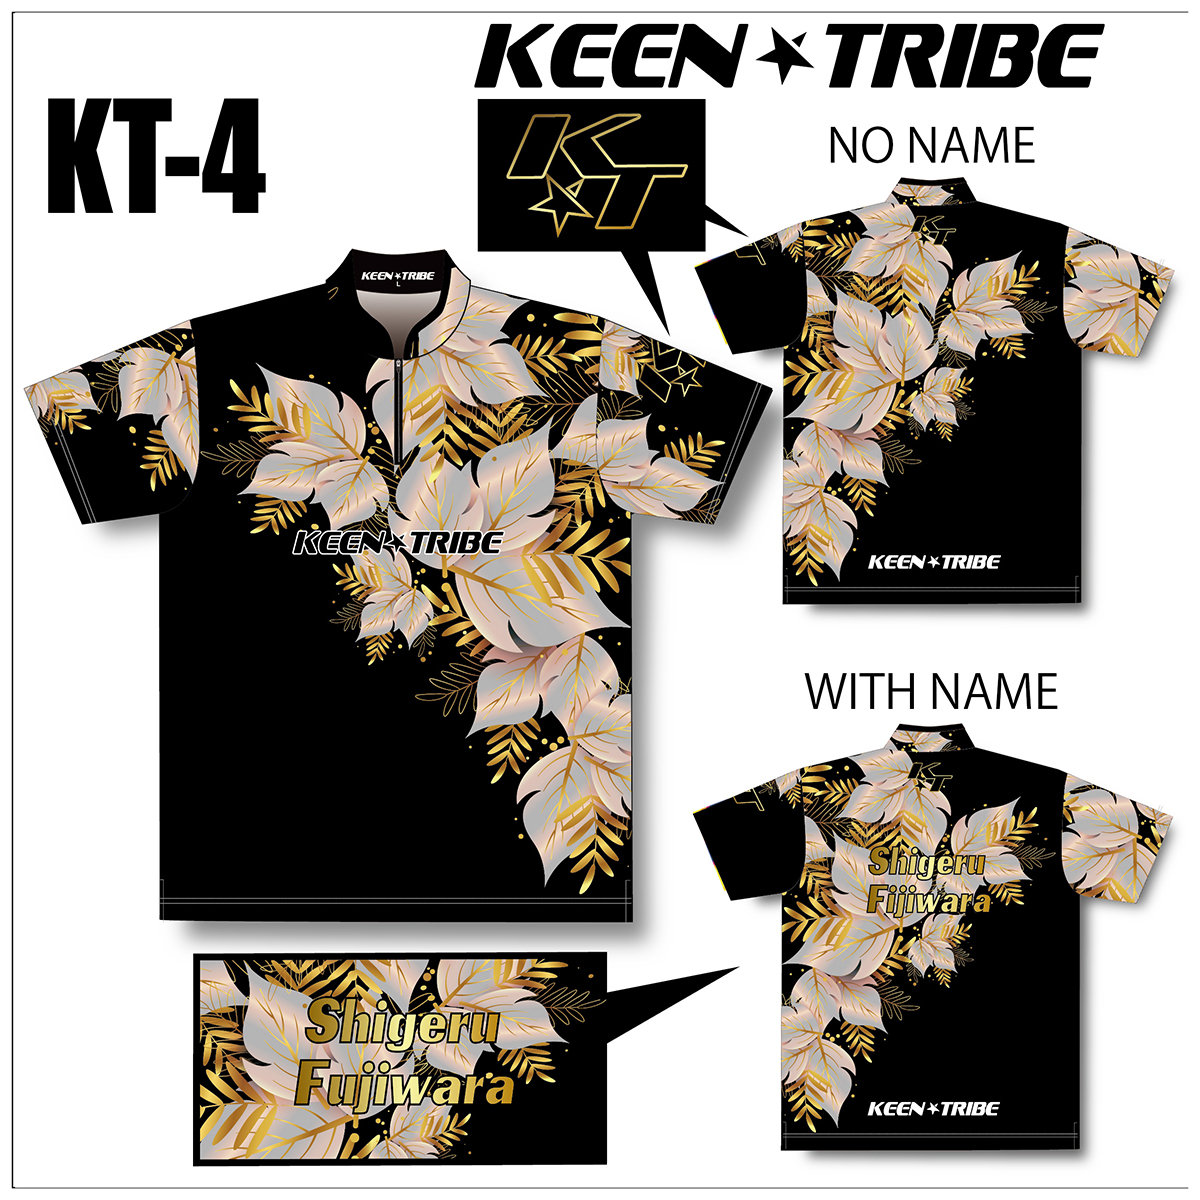 KEEN ★ TRIBE　KT-4(受注生産)